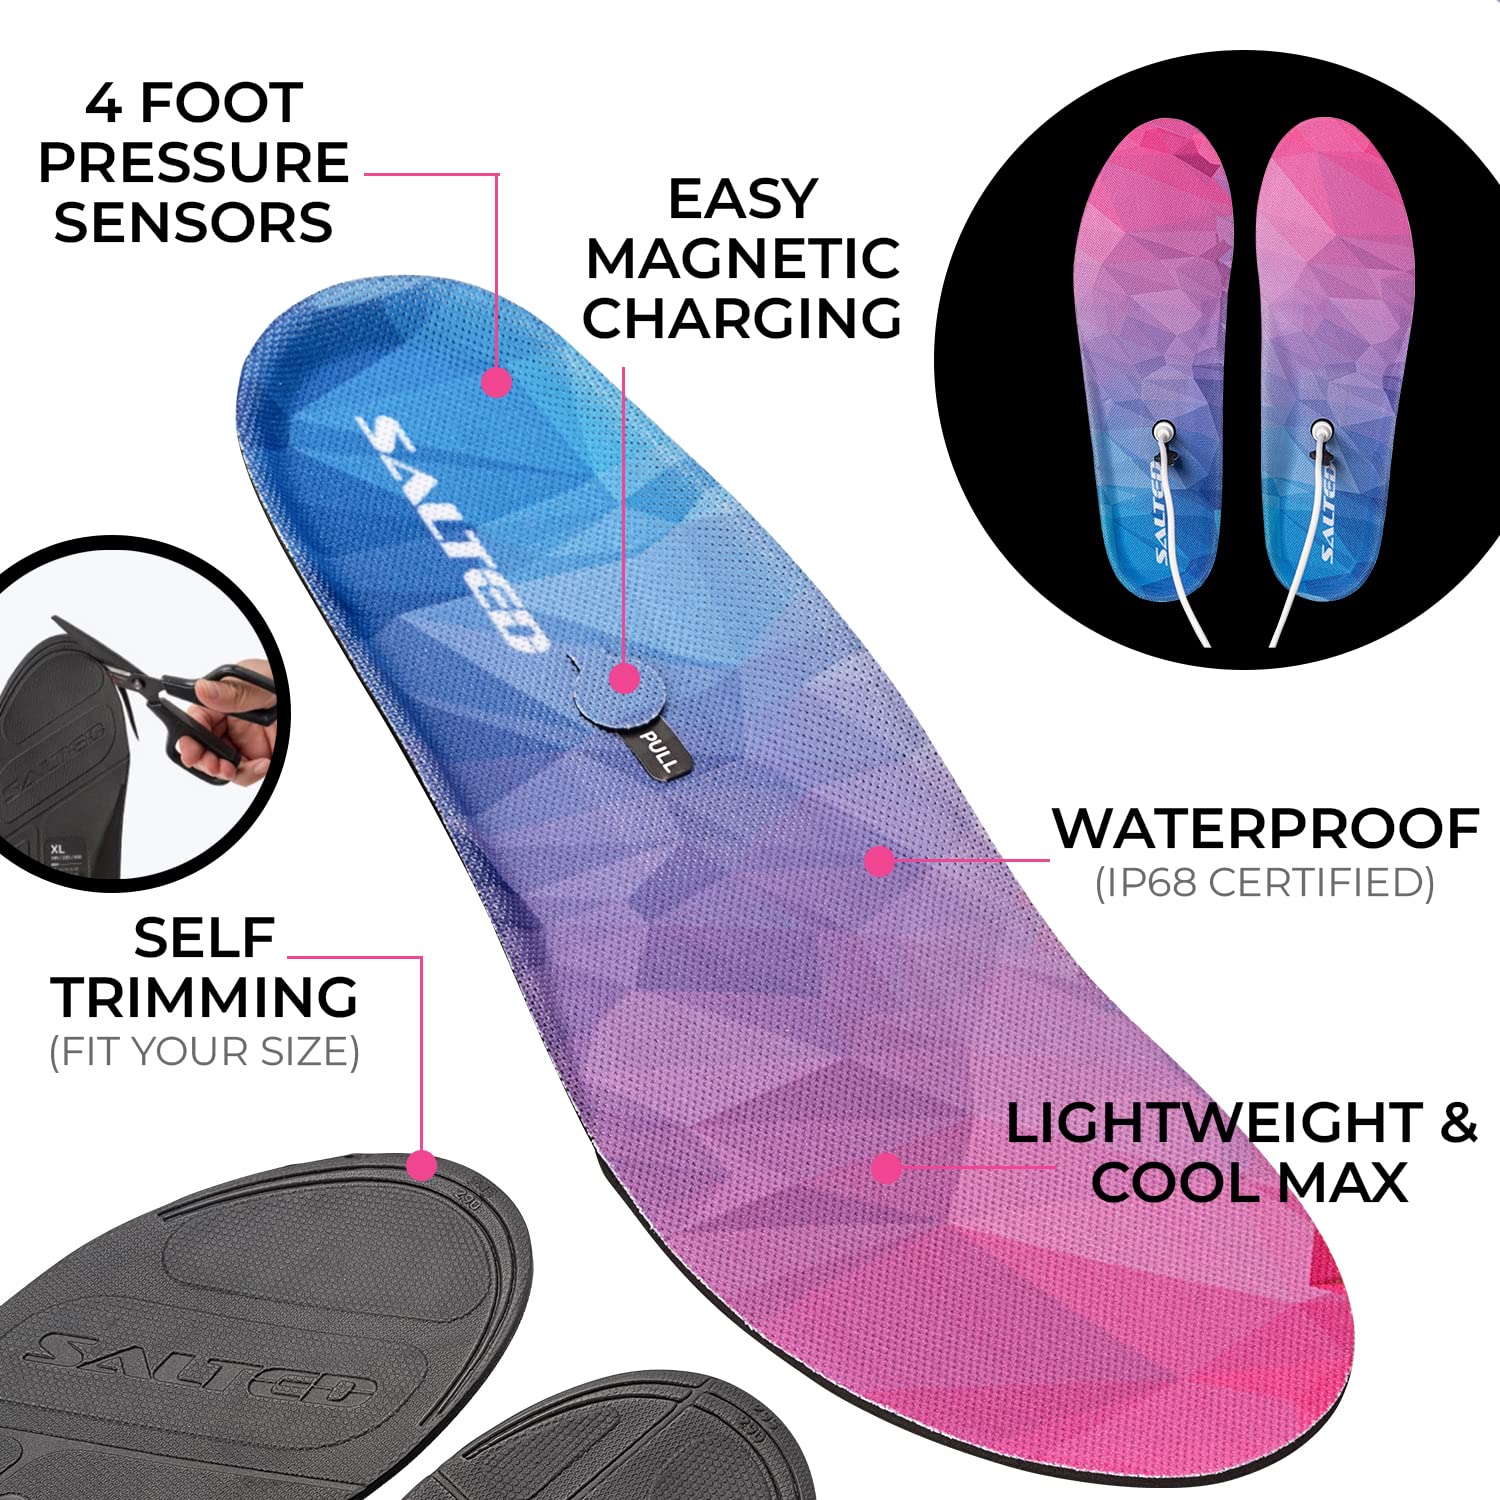 SALTED Smart Insole with Motion Sensor - Golf Swing Posture Analysis Trainer - Track Weight Shift for Improves Distance - Connects Phones & Tablet PCs via Bluetooth - iOS/Android App